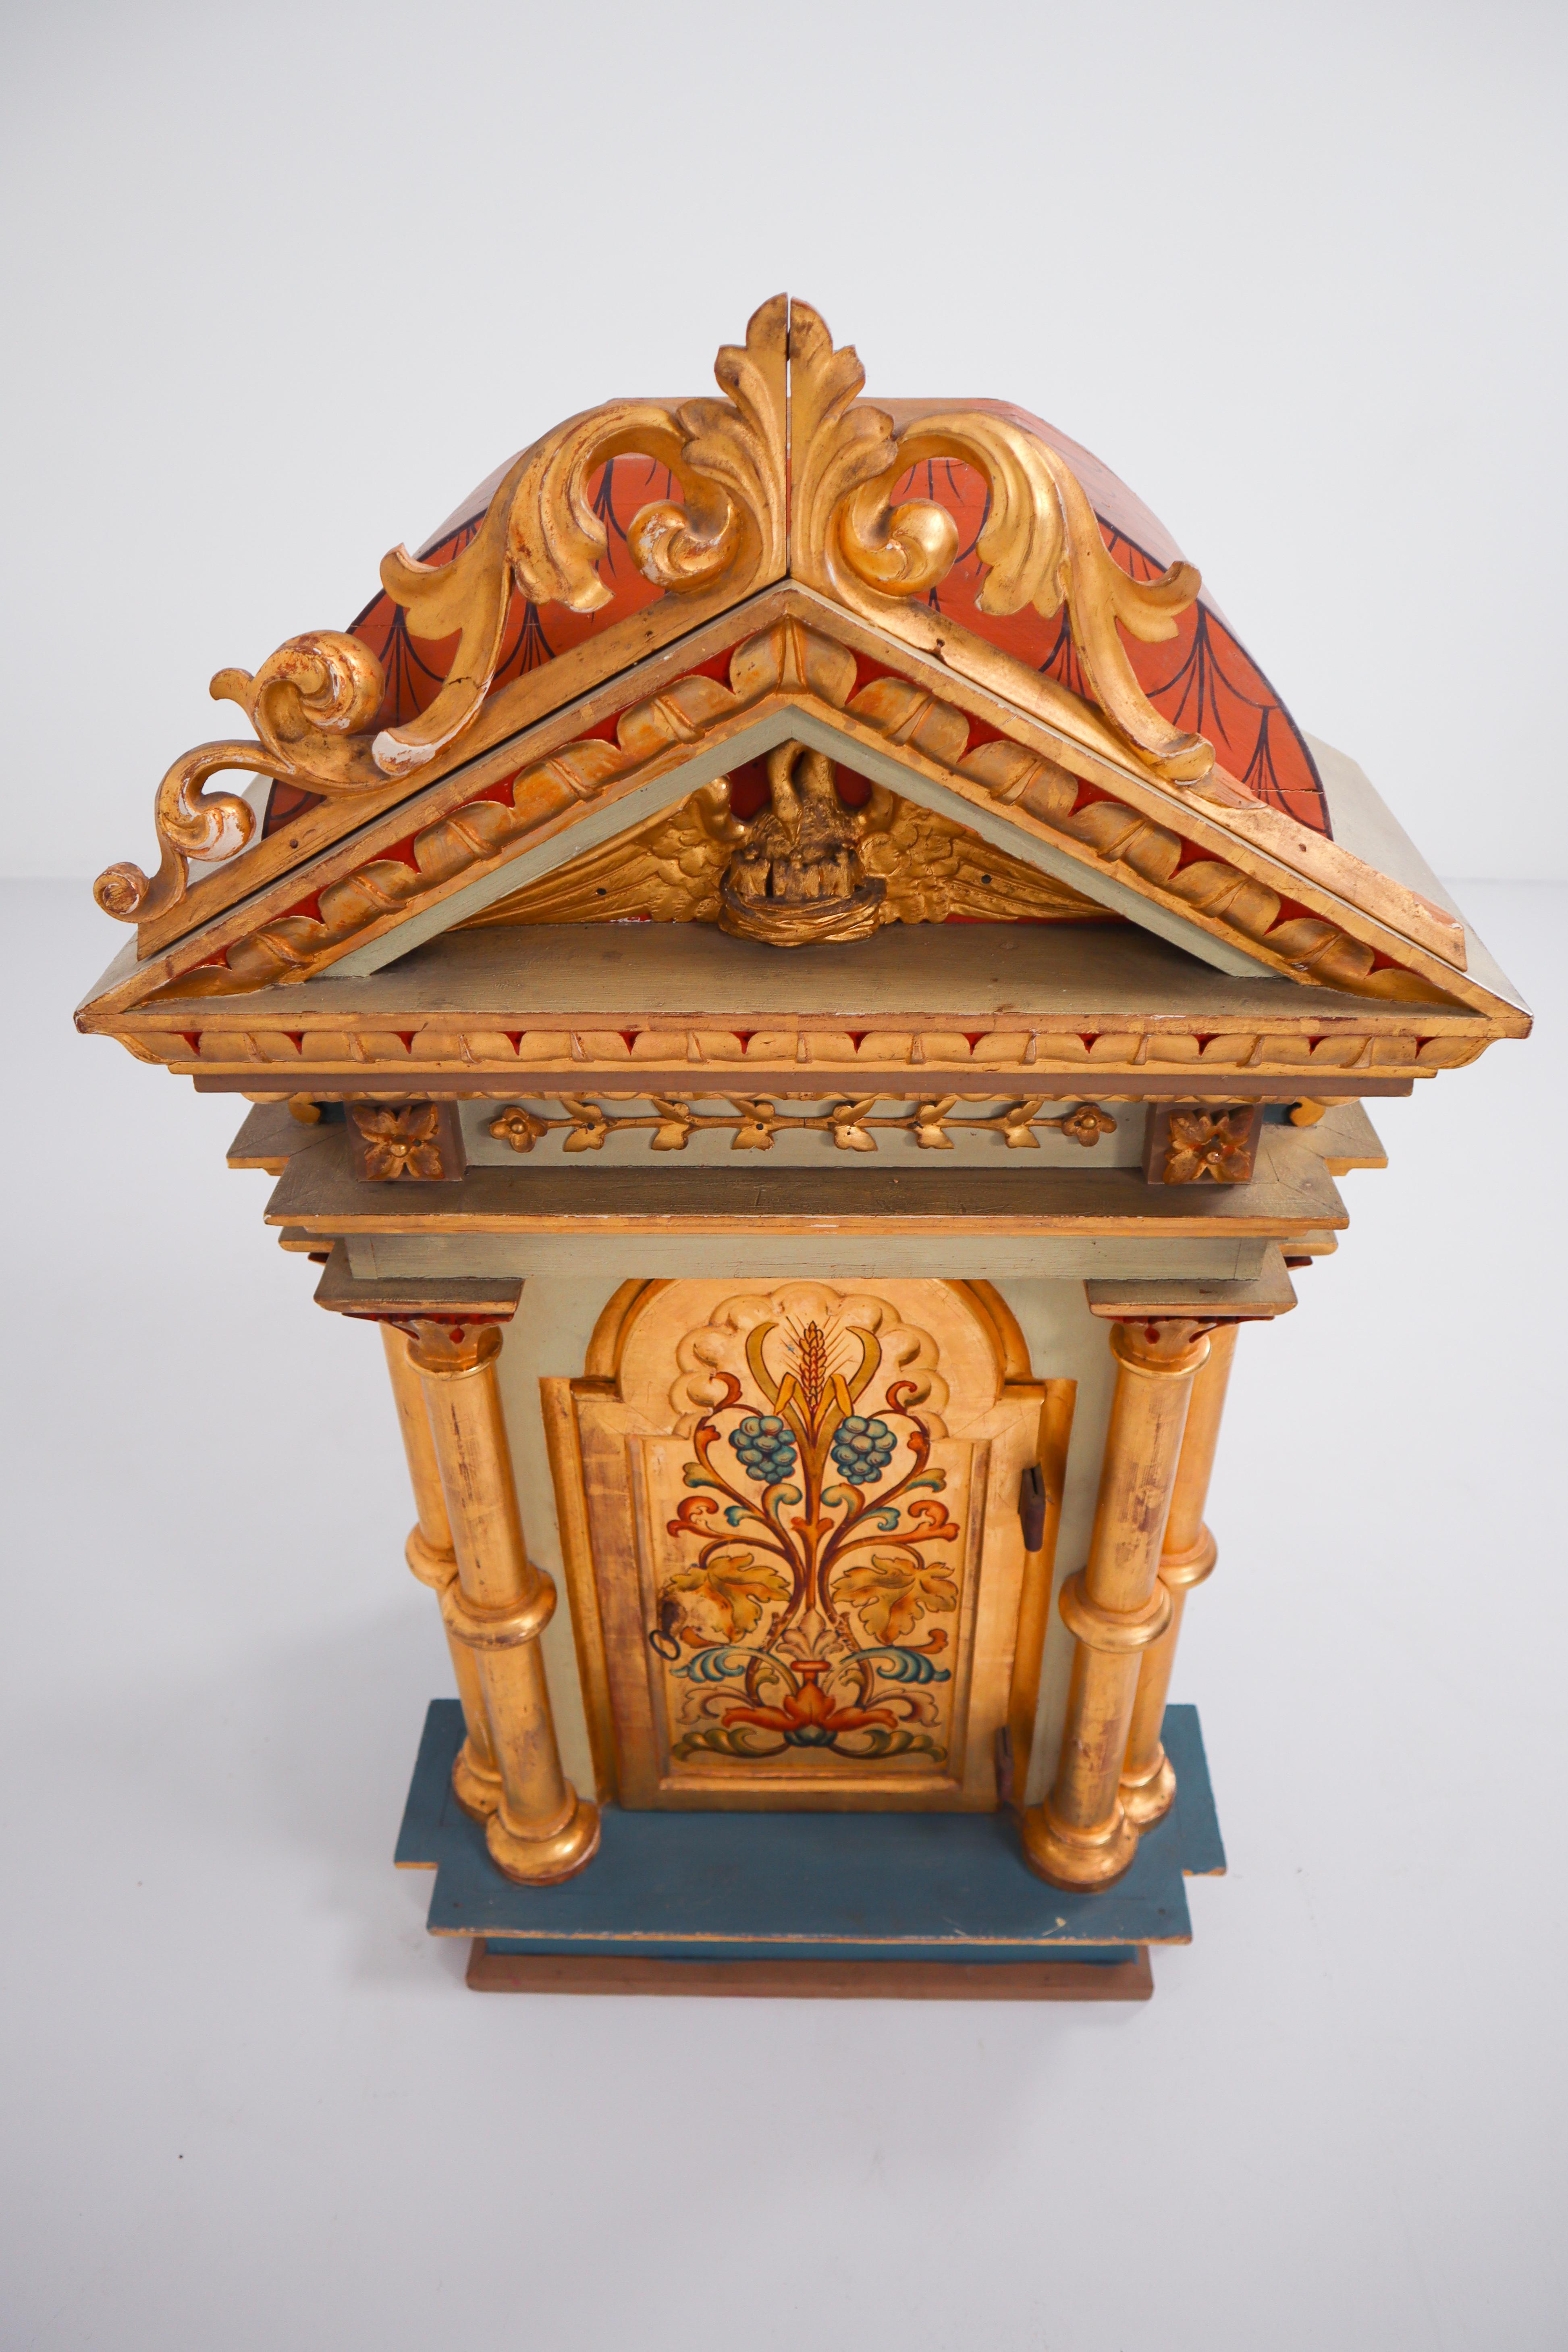 Wood Baroque Cabinet in Gold Color Painted Germany Early 19th Century